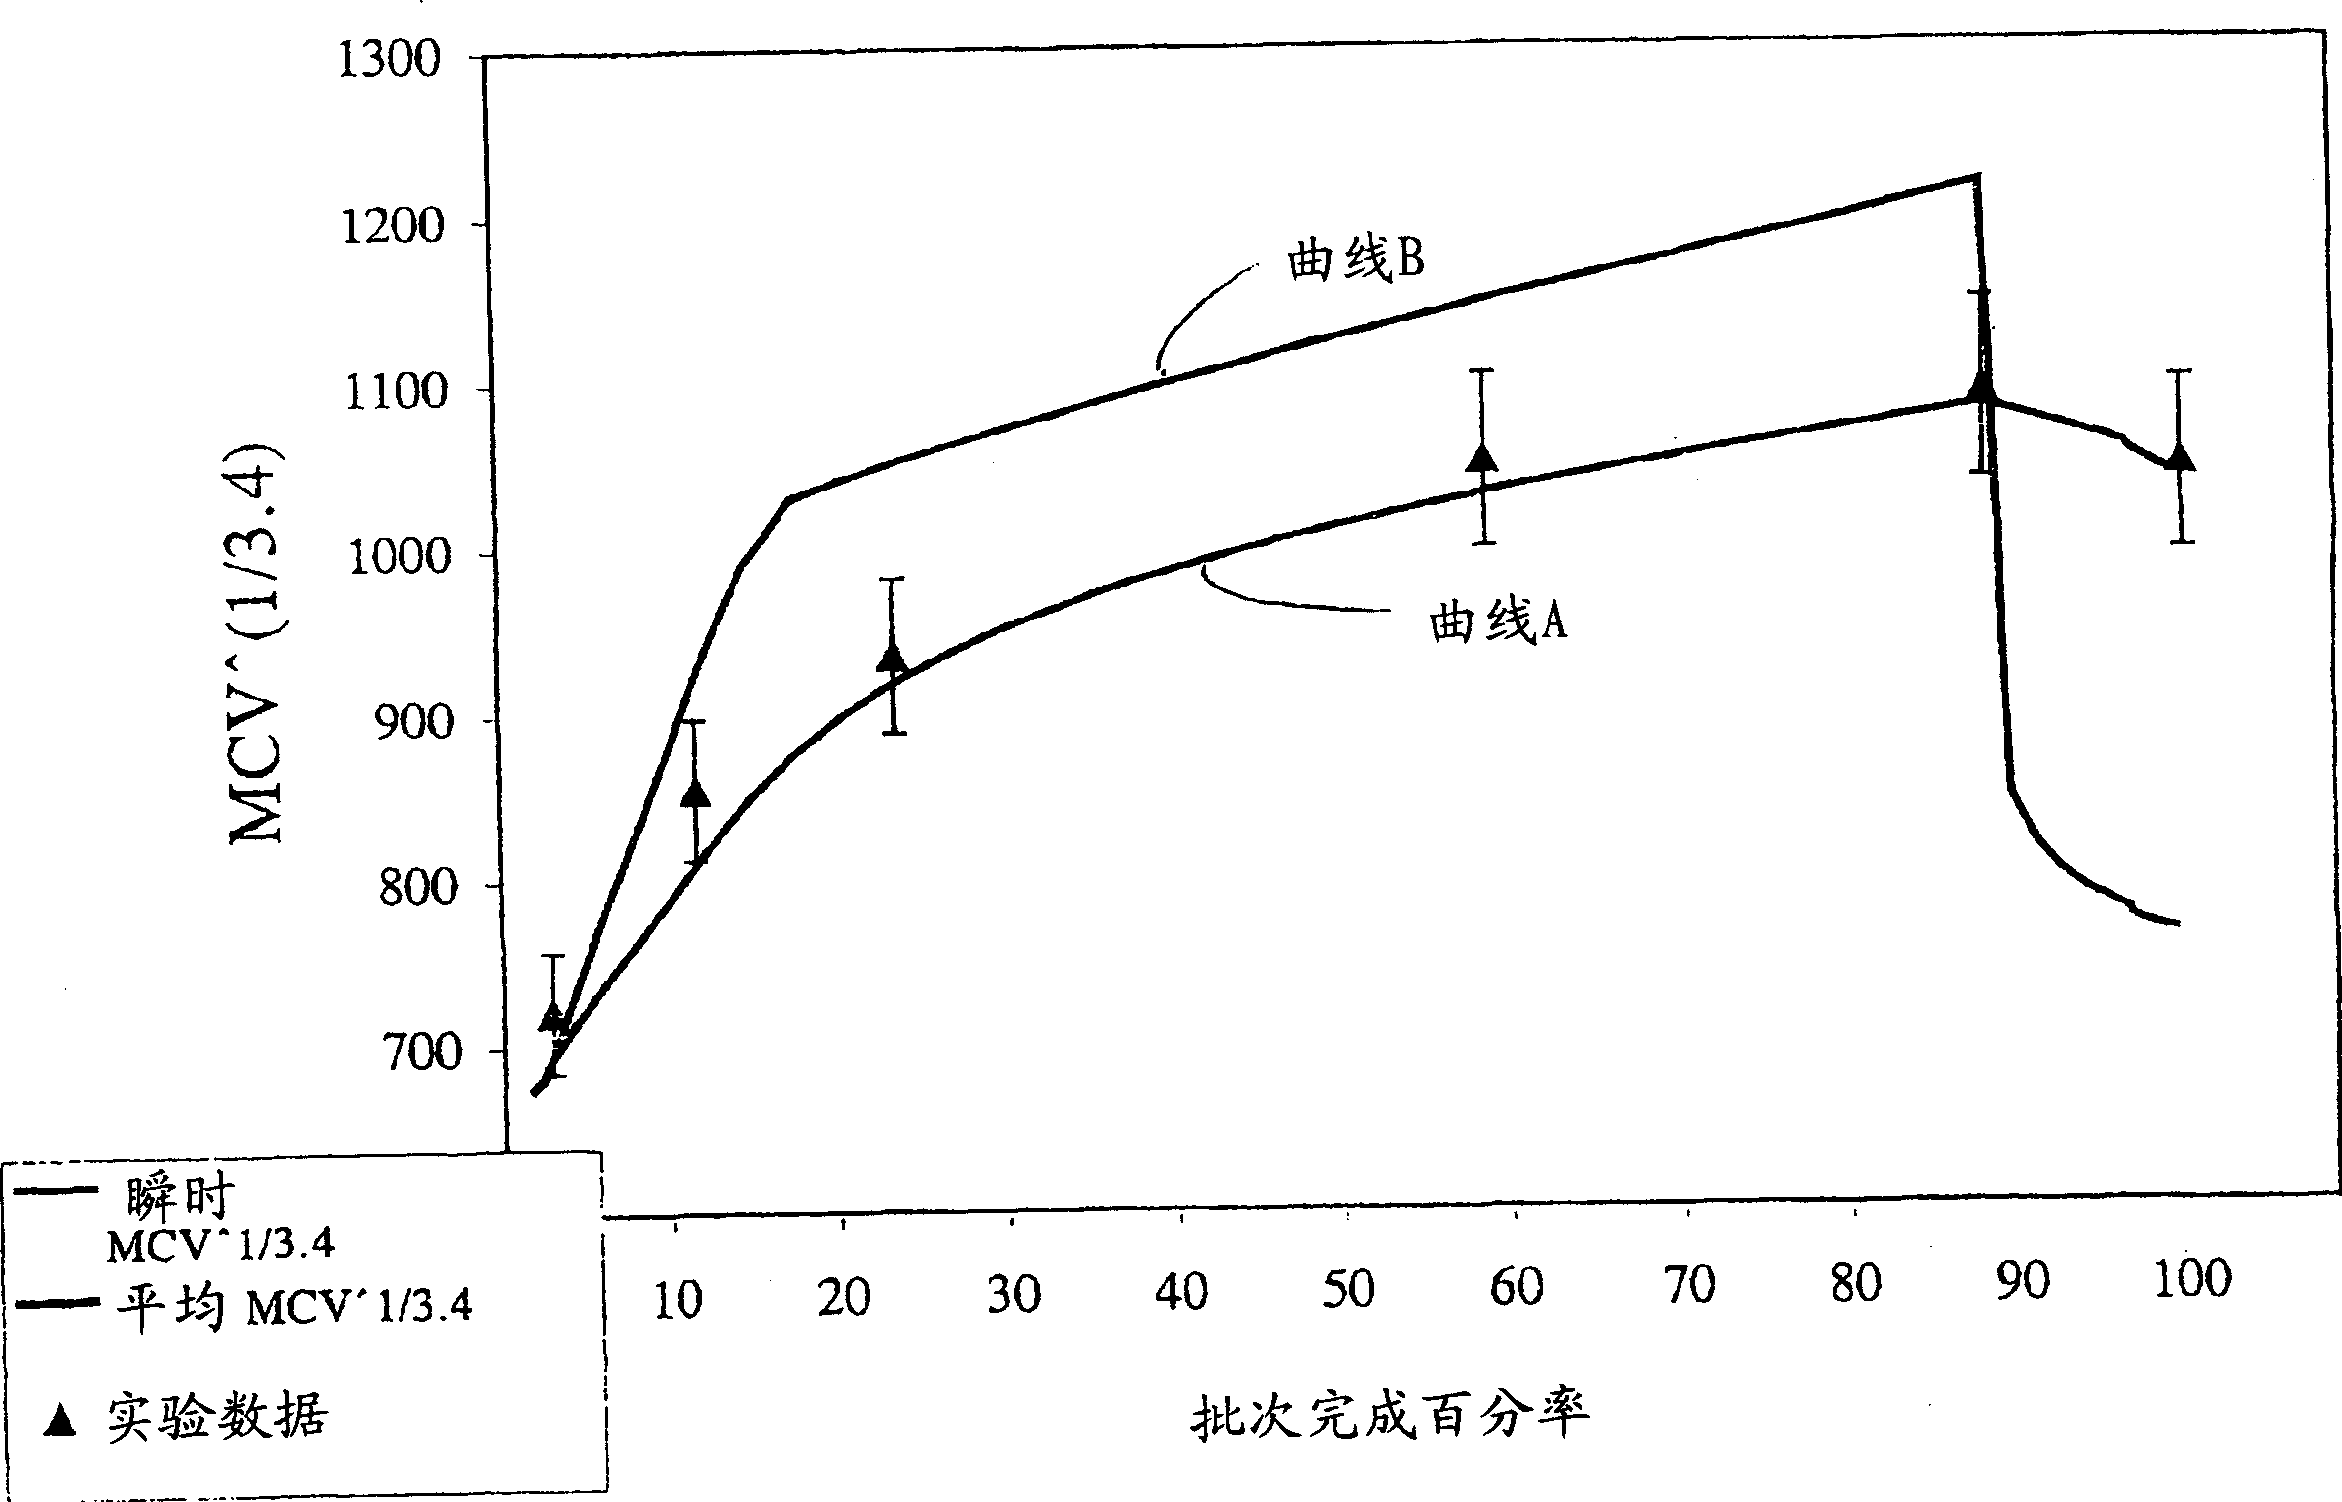 Concentrated fluoroploymer dispersions